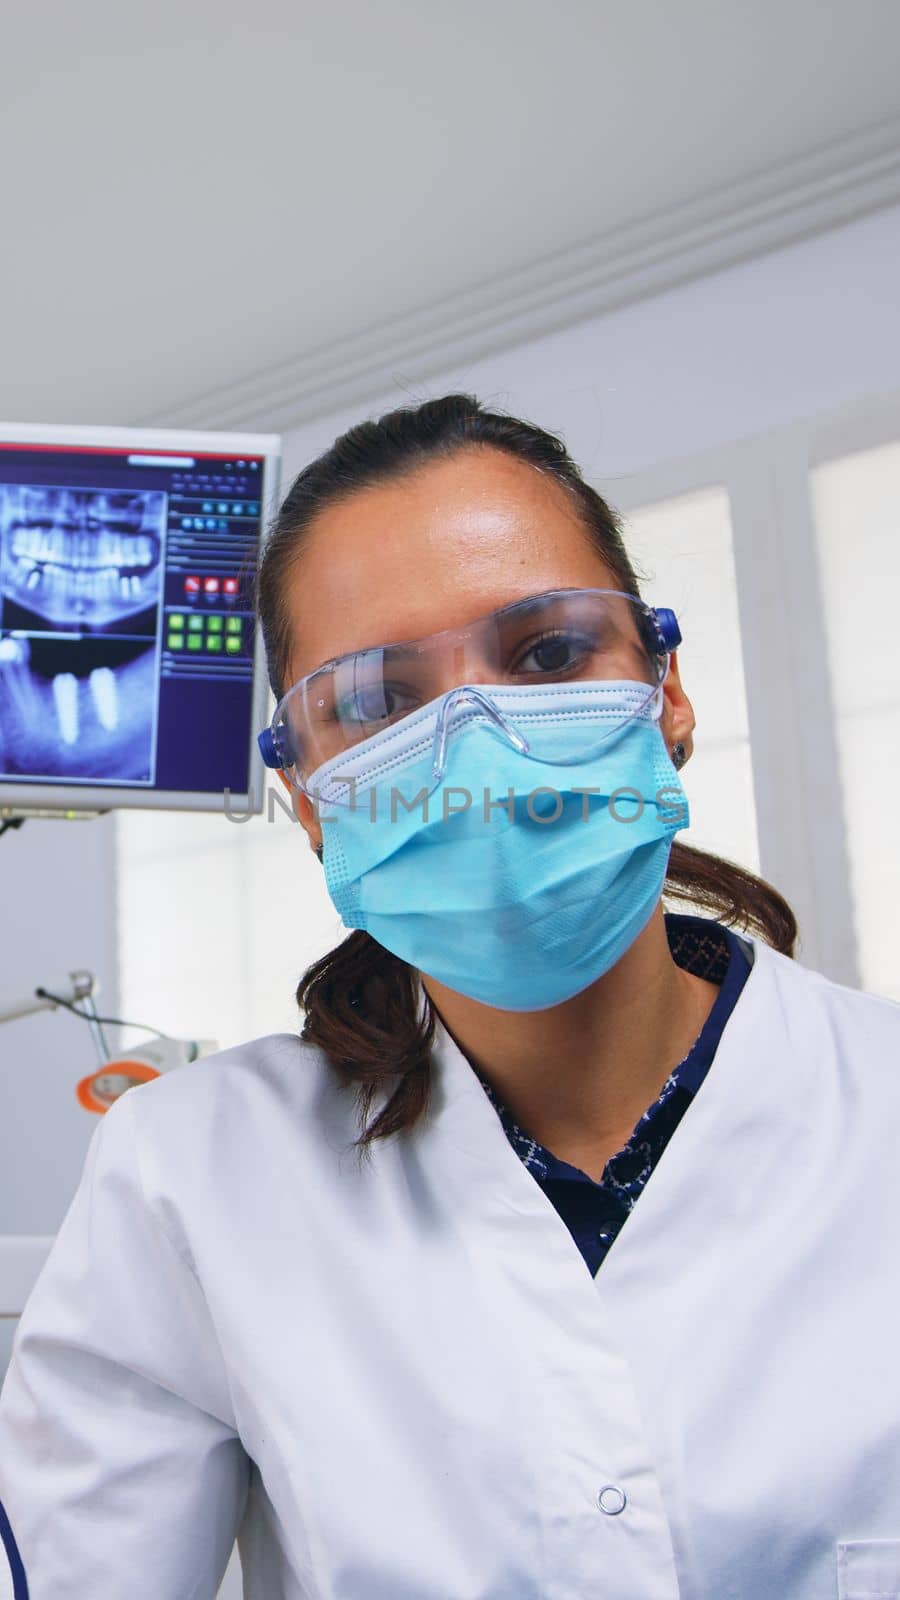 Pov of dentist working on patient mouth hygine by DCStudio